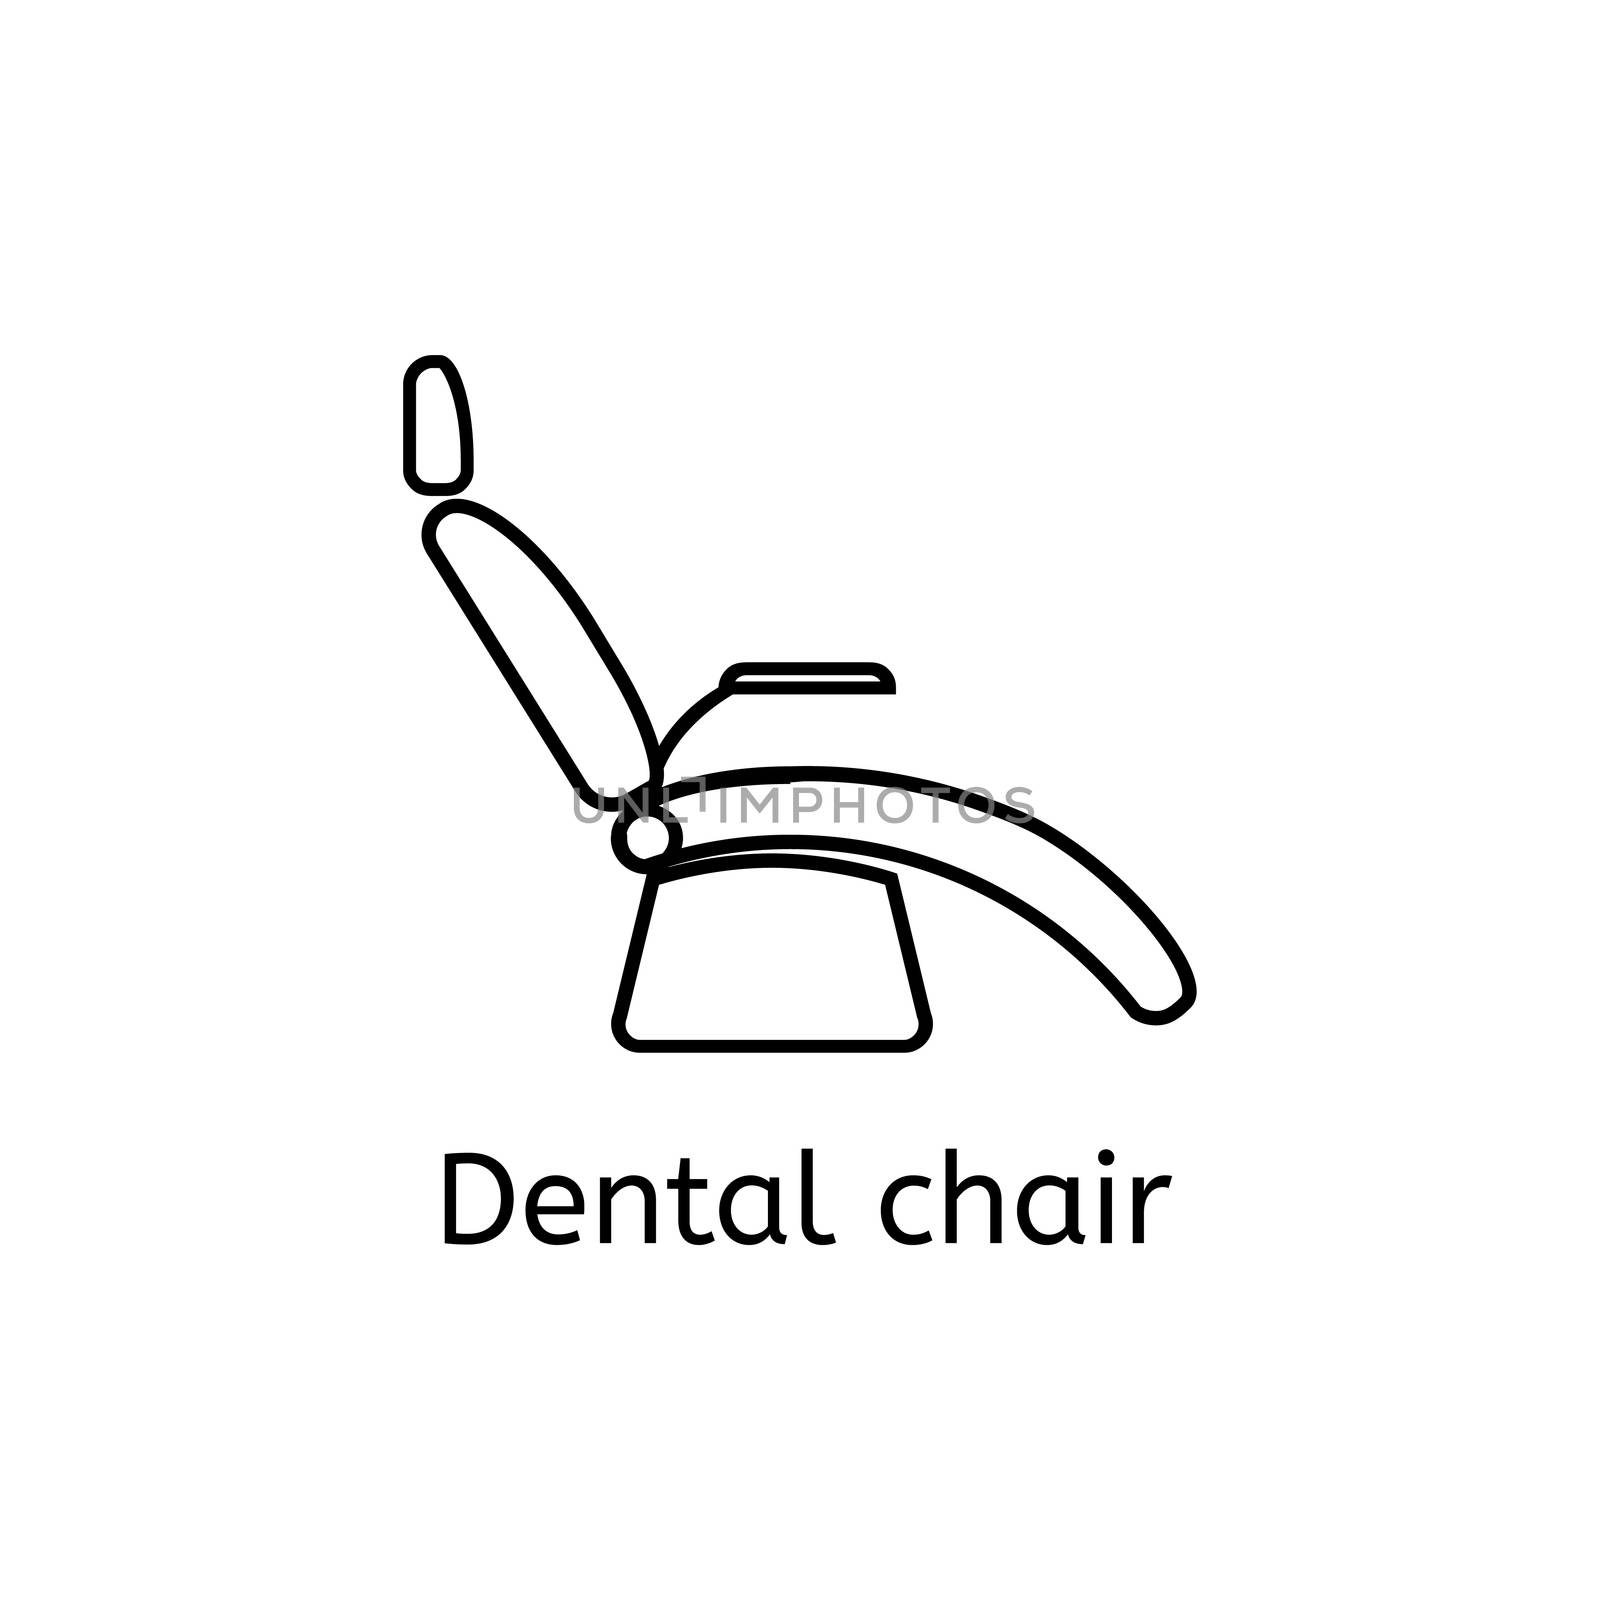 Dentist chair simple icon in outline style. Isolated illustration. by Elena_Garder